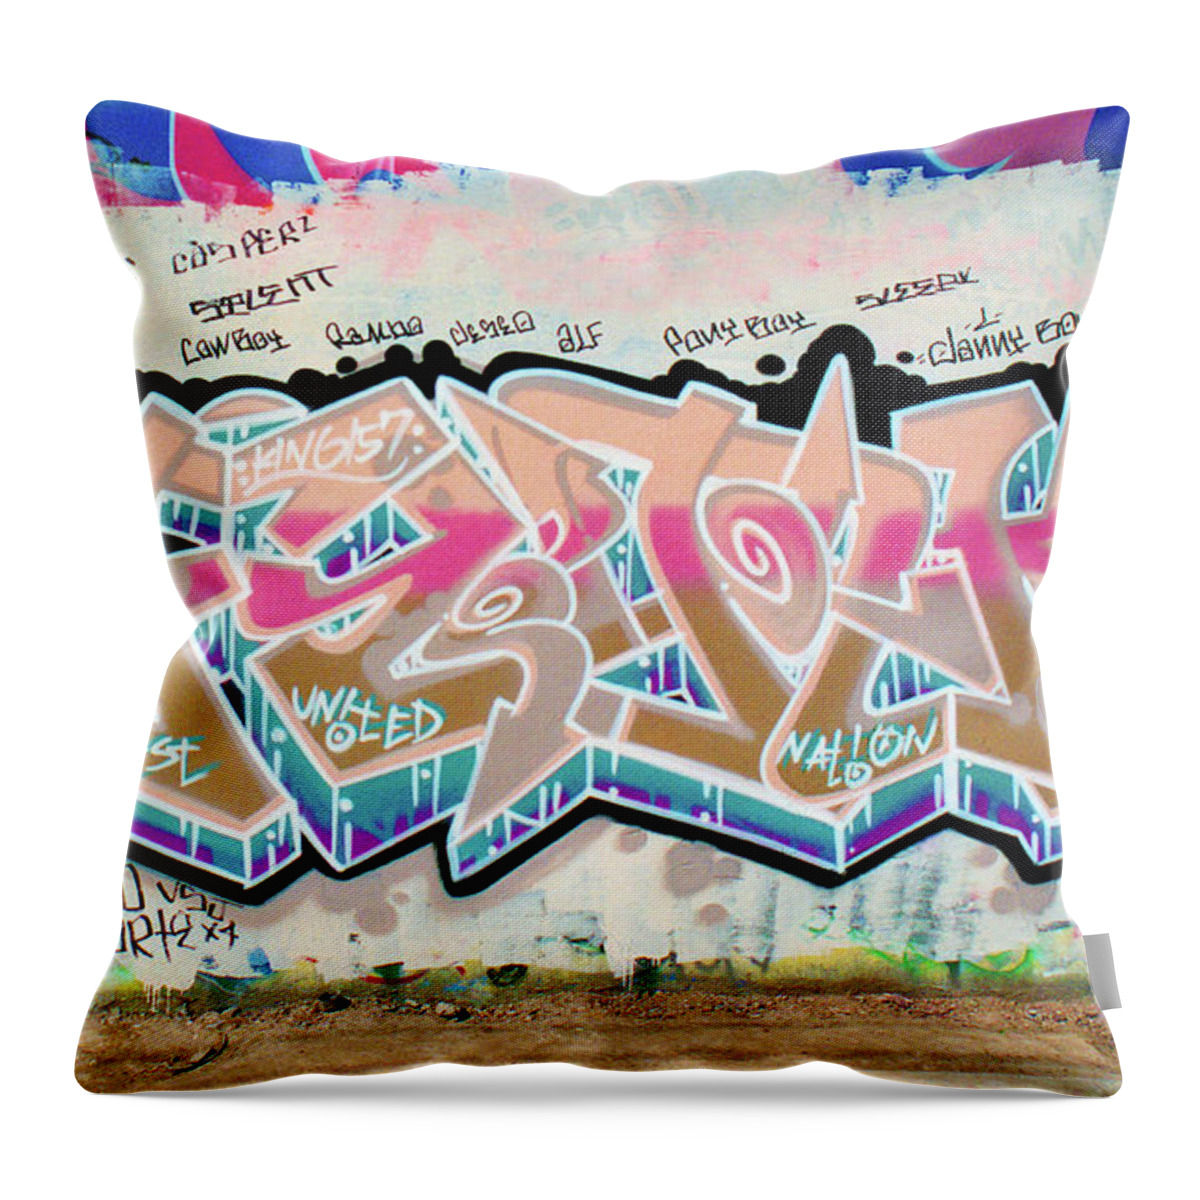 Funk Throw Pillow featuring the photograph FUNK, FIRST UNITED NATION KINGS, Graffiti Art by King 157, North 11th Street, San Jose, California by Kathy Anselmo